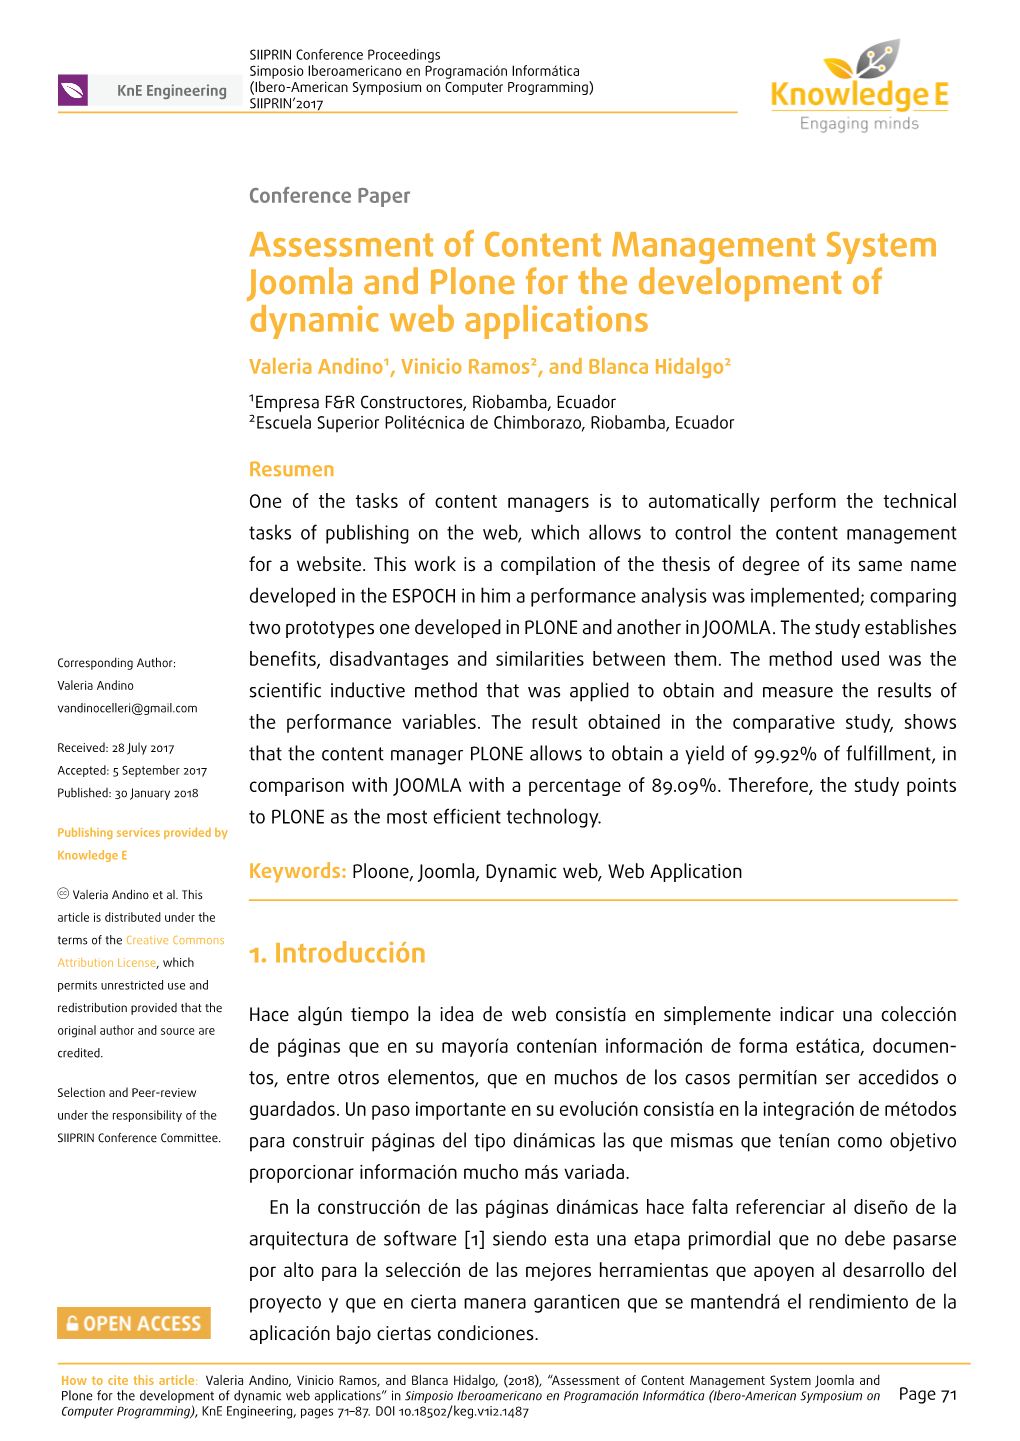 Assessment of Content Management System Joomla and Plone for the Development of Dynamic Web Applications